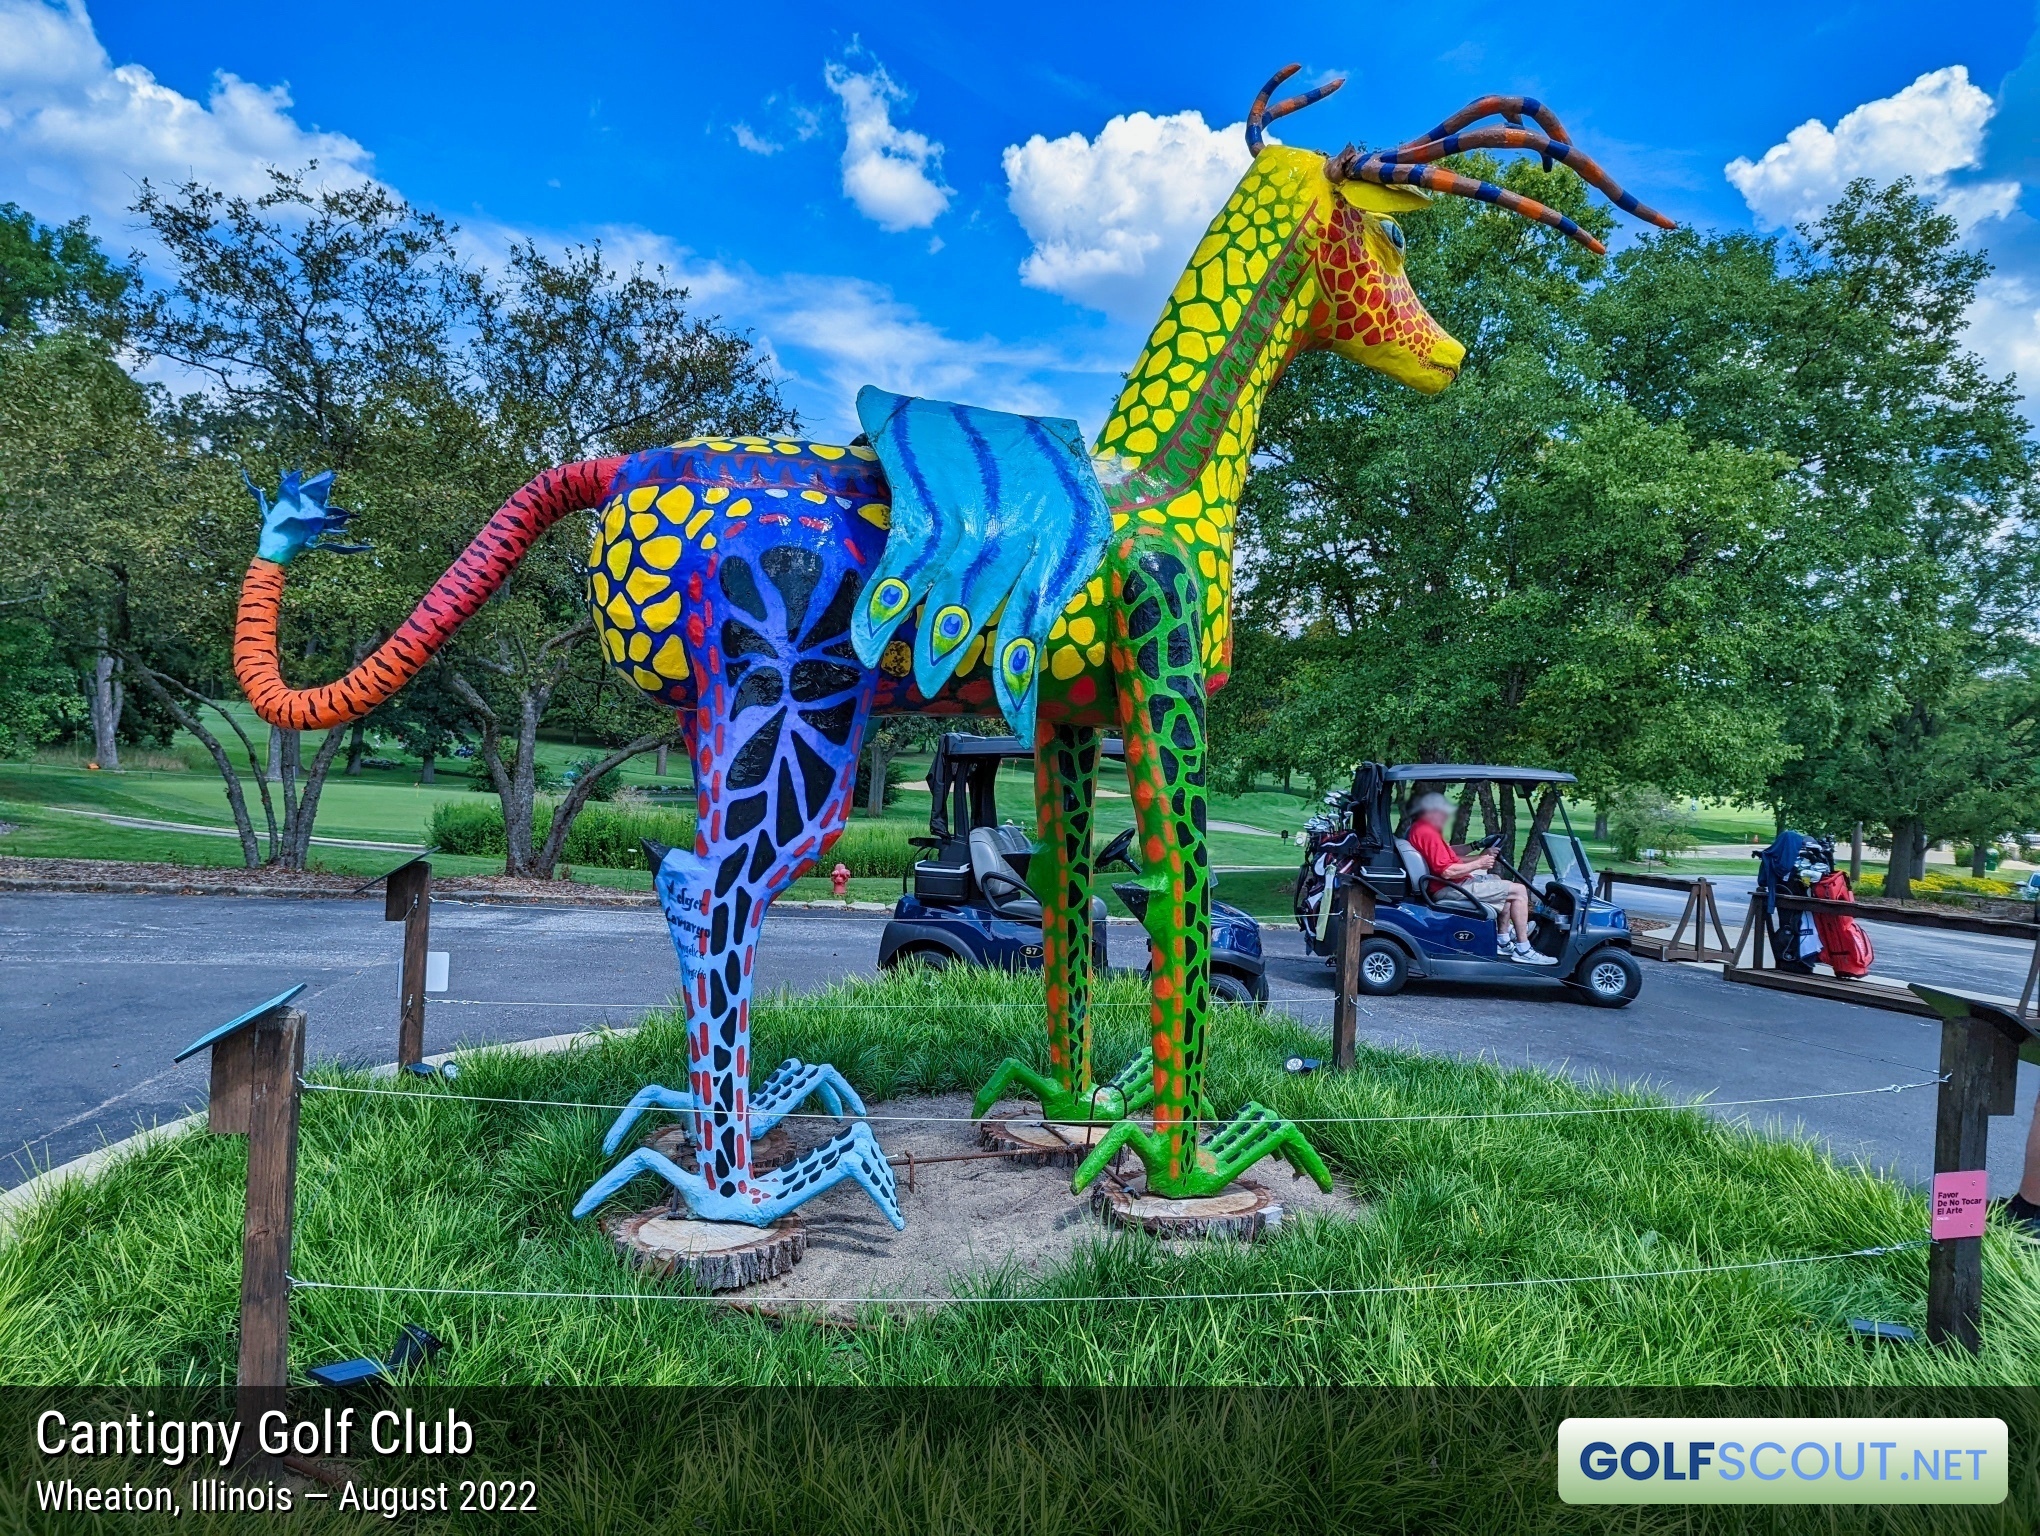 Miscellaneous photo of Cantigny Lakeside Course in Wheaton, Illinois. This was part of an outdoor art exhibit featuring imaginary creatures inspired by Mexican folklore, entitled “Alebrijes: Creatures of a Dream World” and was on display through October 2022.